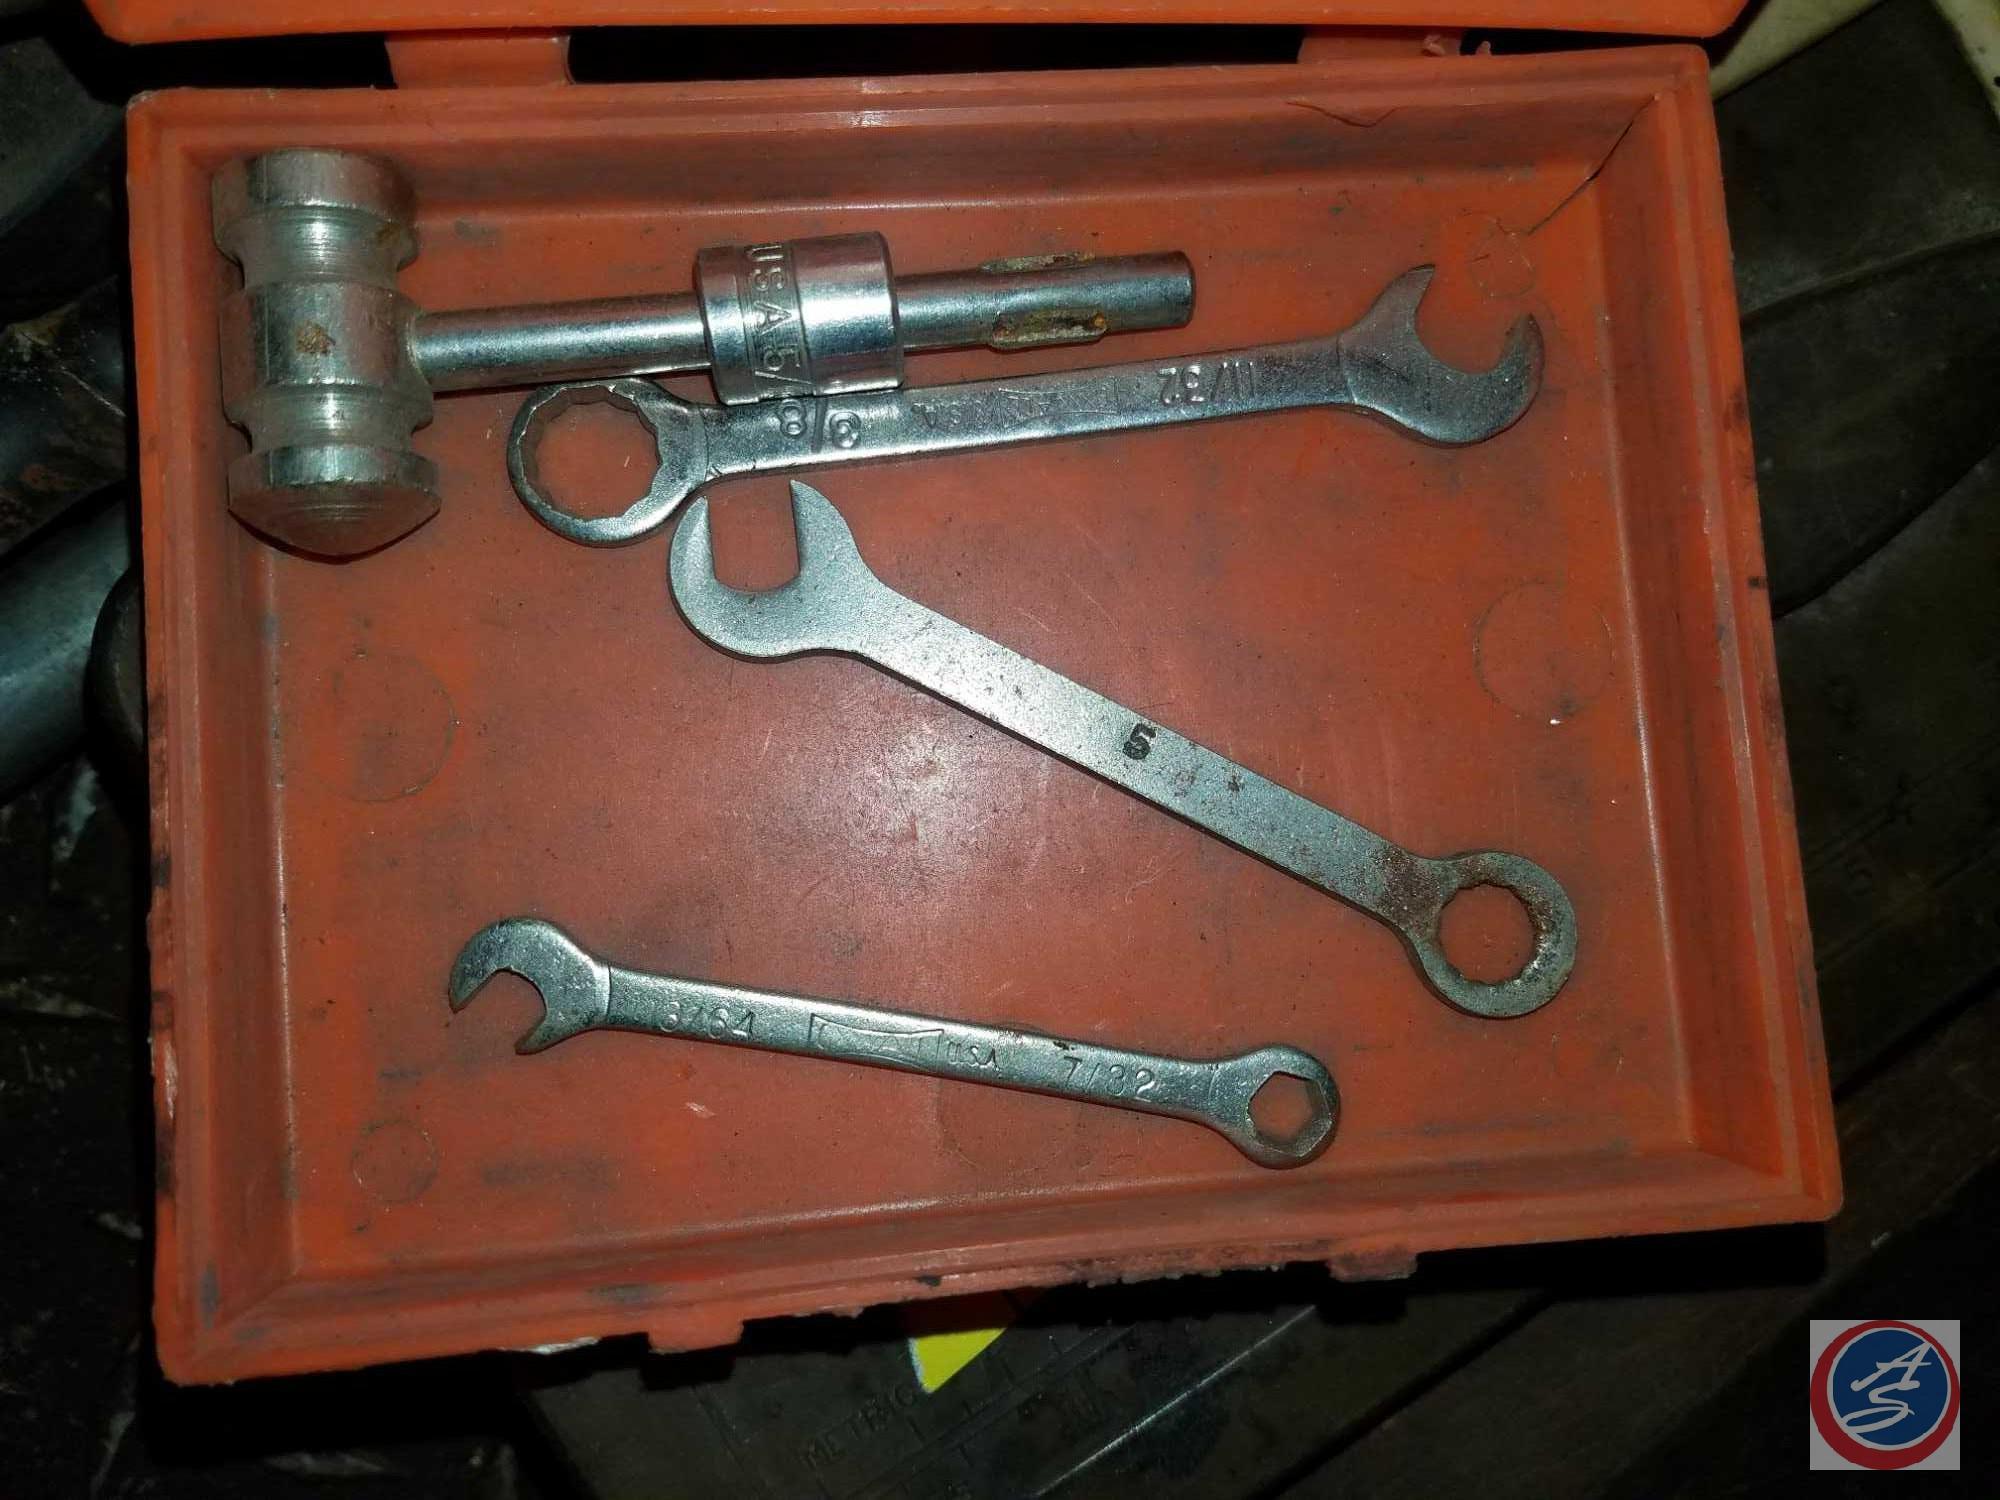 Shoulder Screws, Assorted Steel Pieces, Tiny Wrenches, Washers